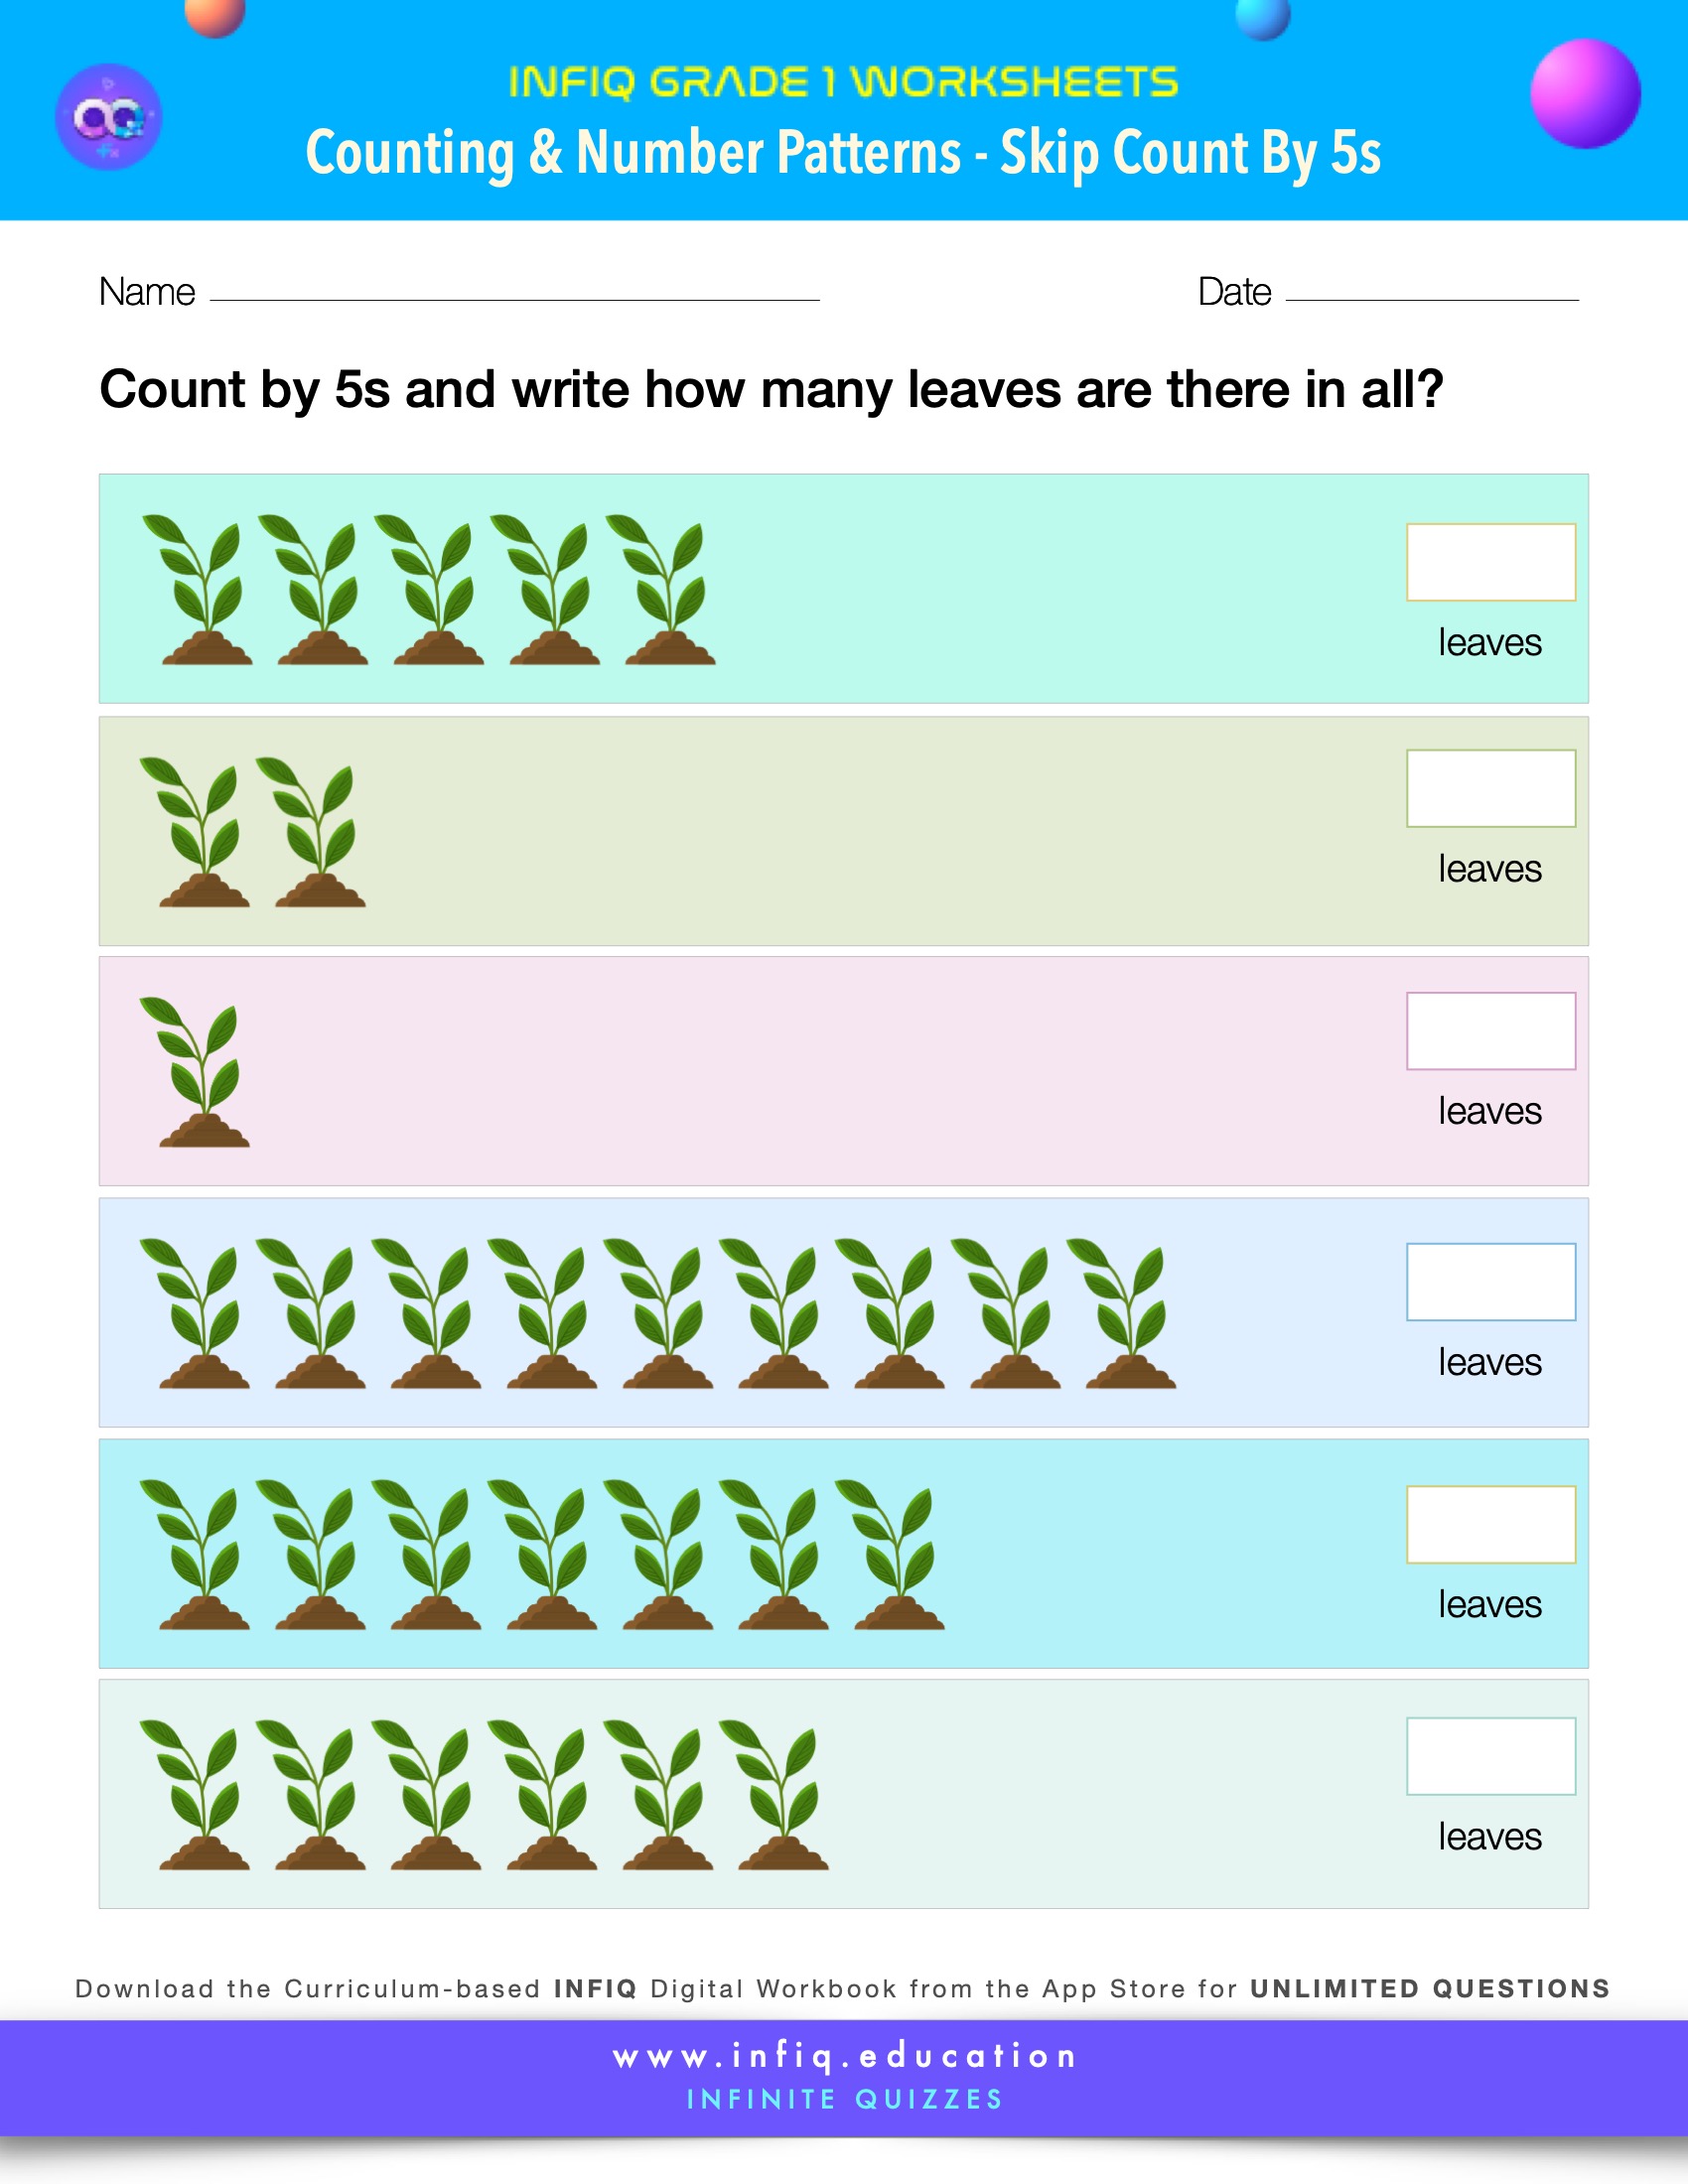 Grade 1 Math Worksheet - Counting & Number Patterns - Skip Count By 5s (using models)